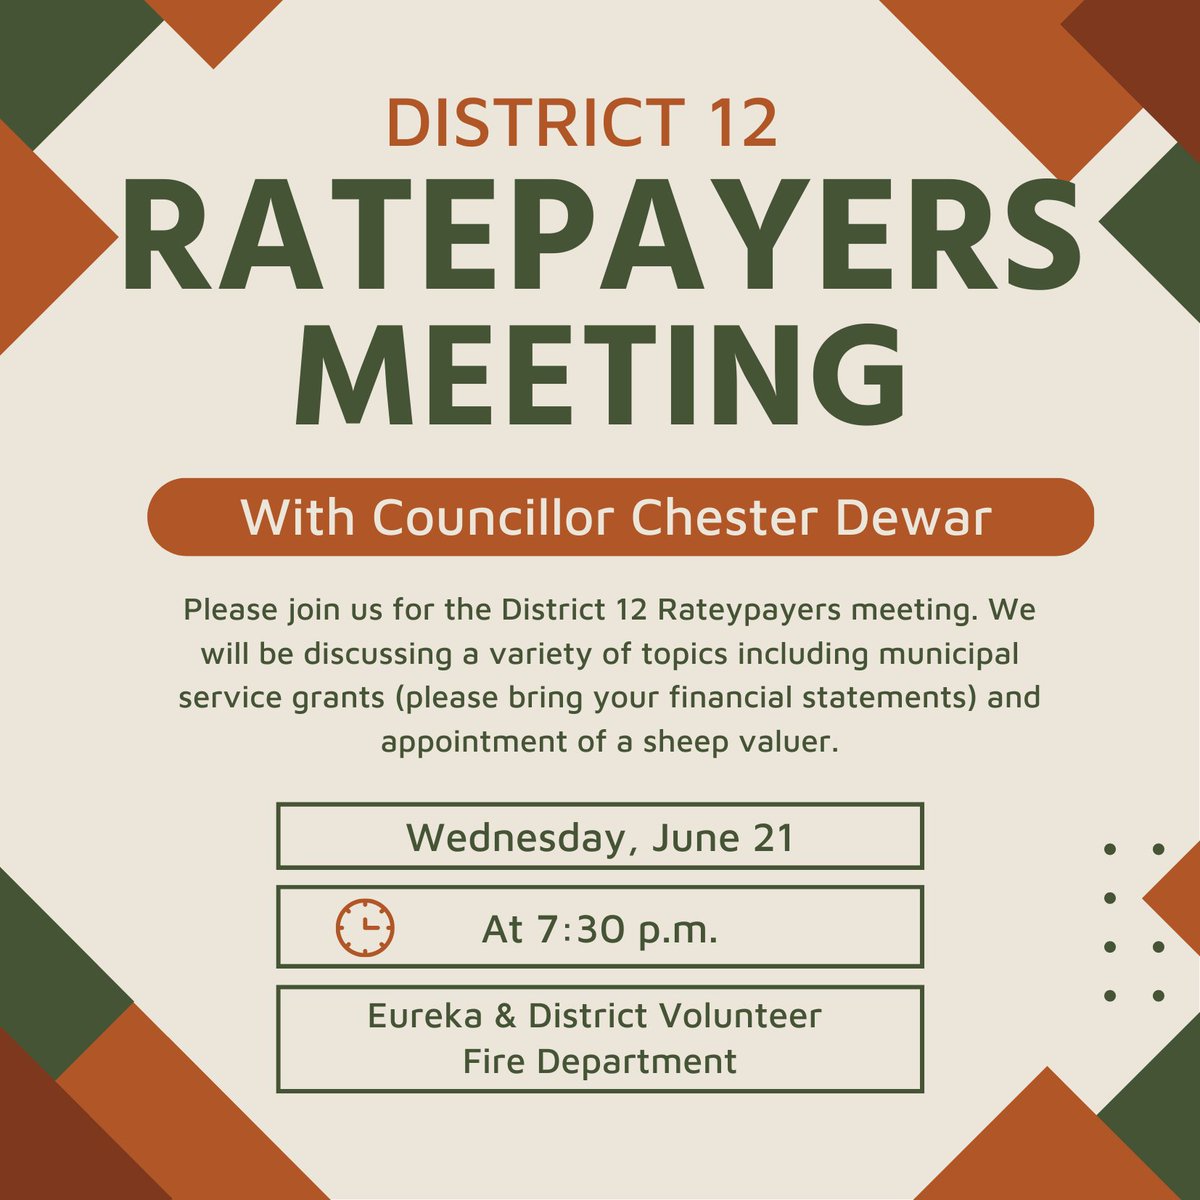 The District 12 Ratepayers meeting will be held on June 21 at 7:30 p.m. at the Eureka and District Fire Department, 5222 Trafalgar Road.